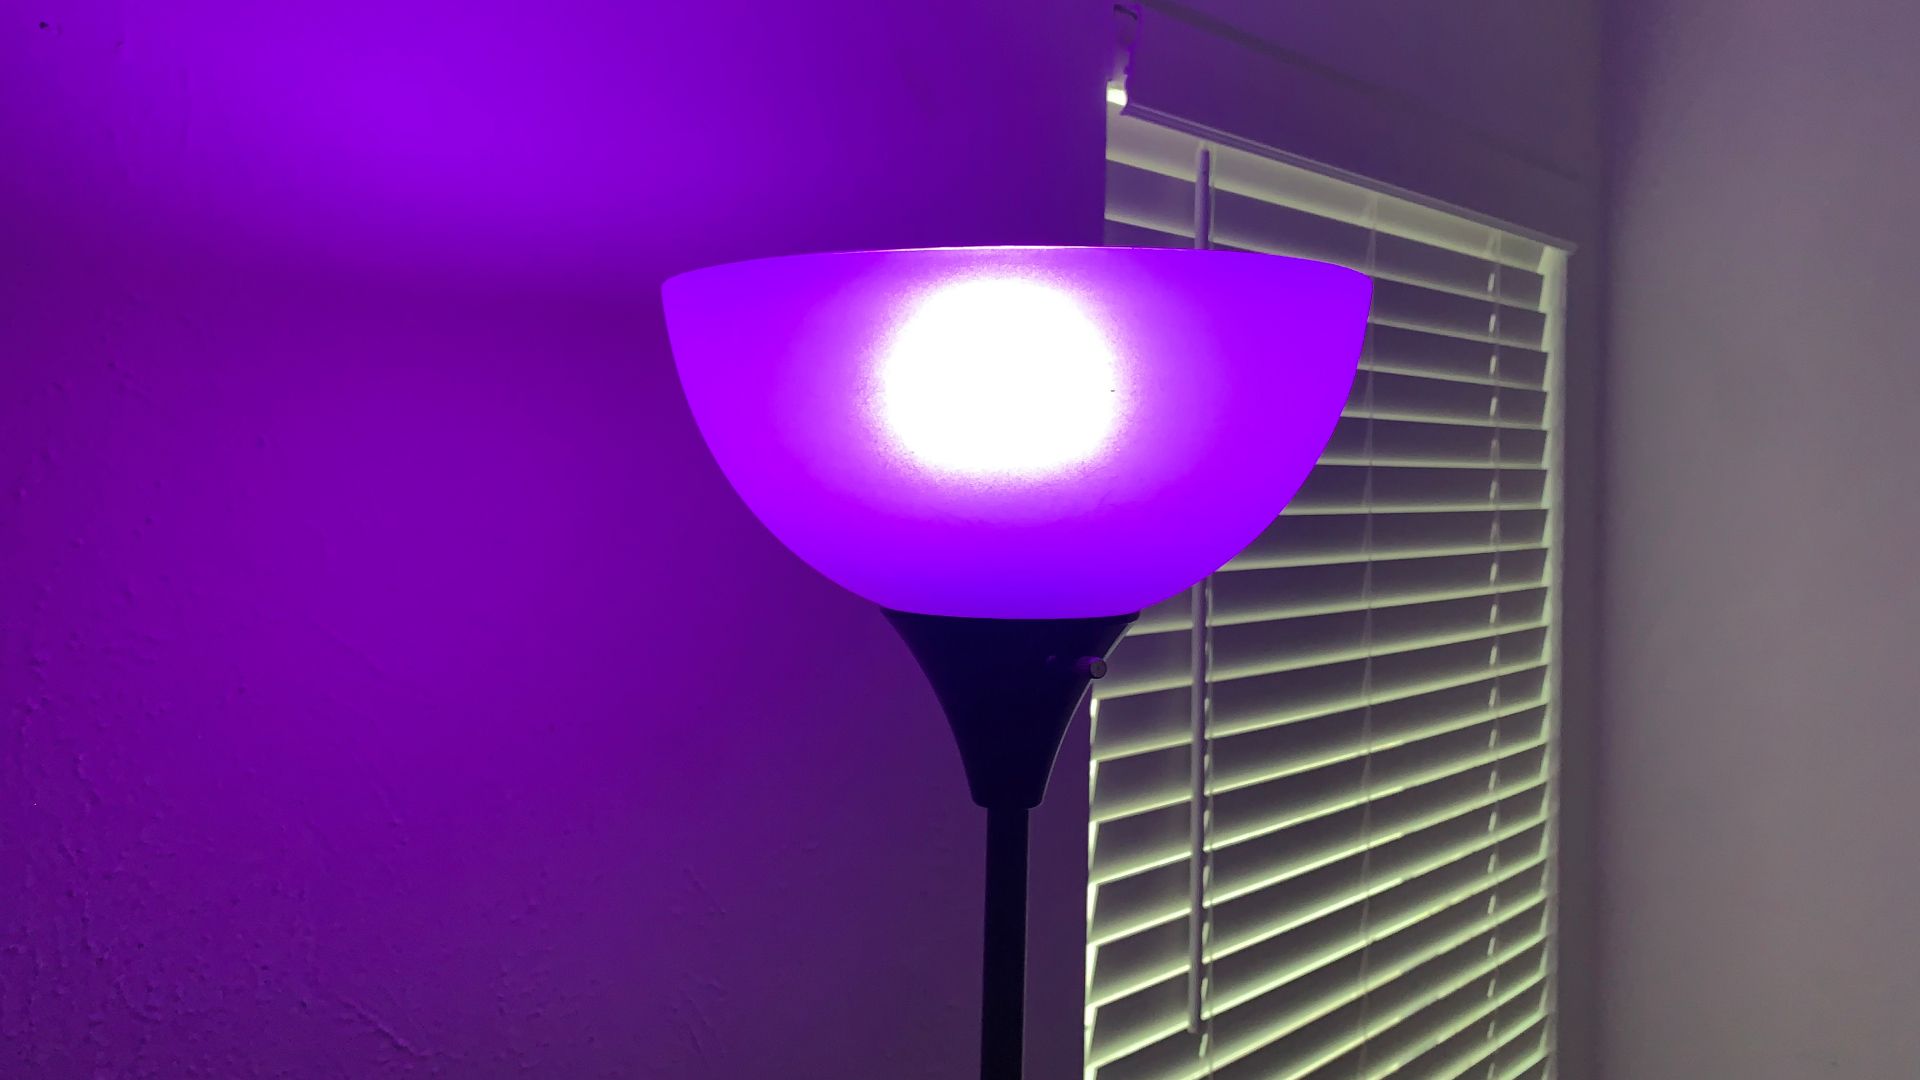 Cync Full Color reveal HD+ Smart Bulb in lamp next to window